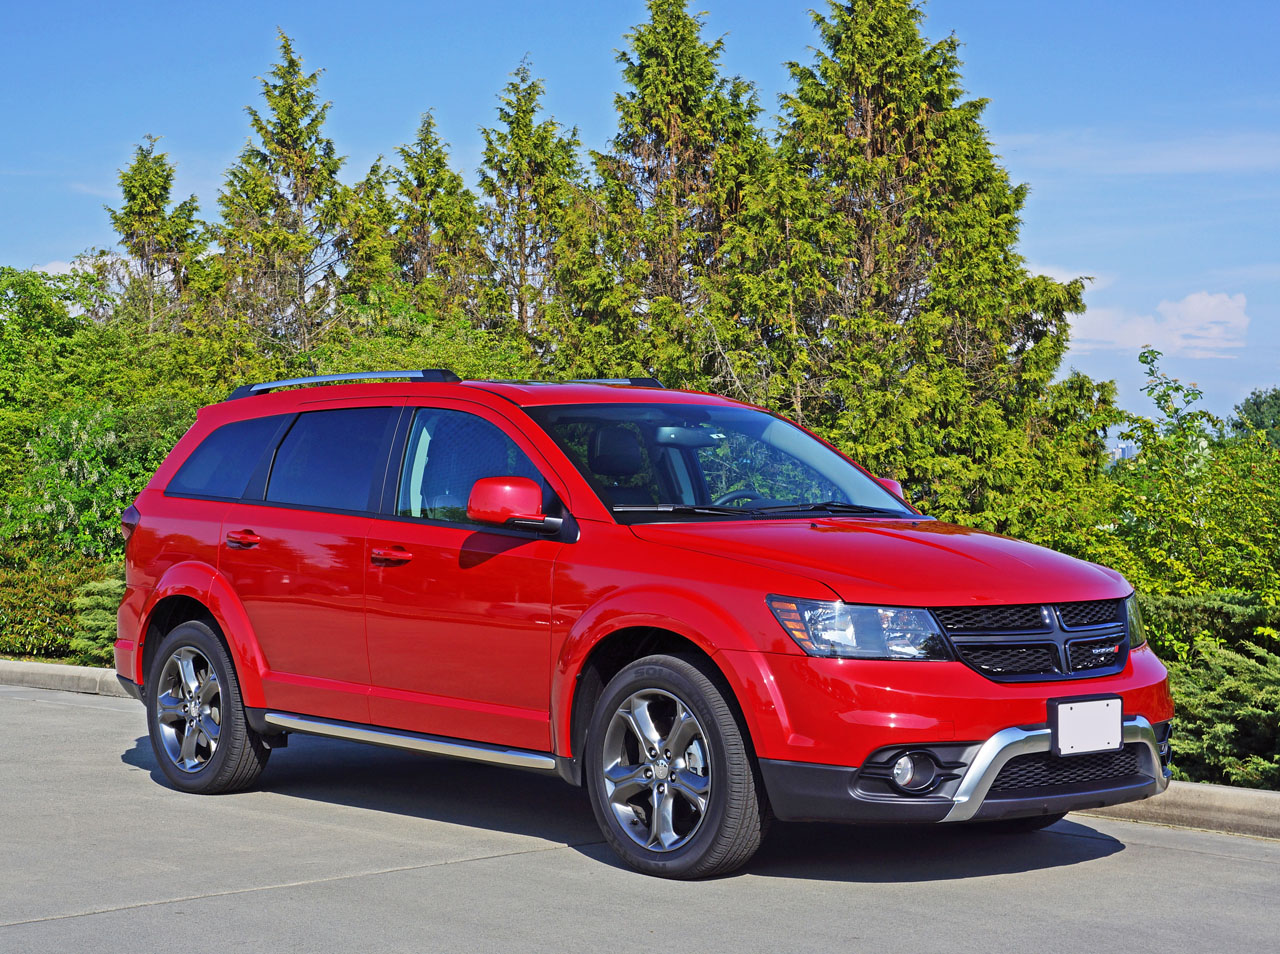 2015 Dodge Journey Crossroad V6 AWD Road Test Review | The Car Magazine